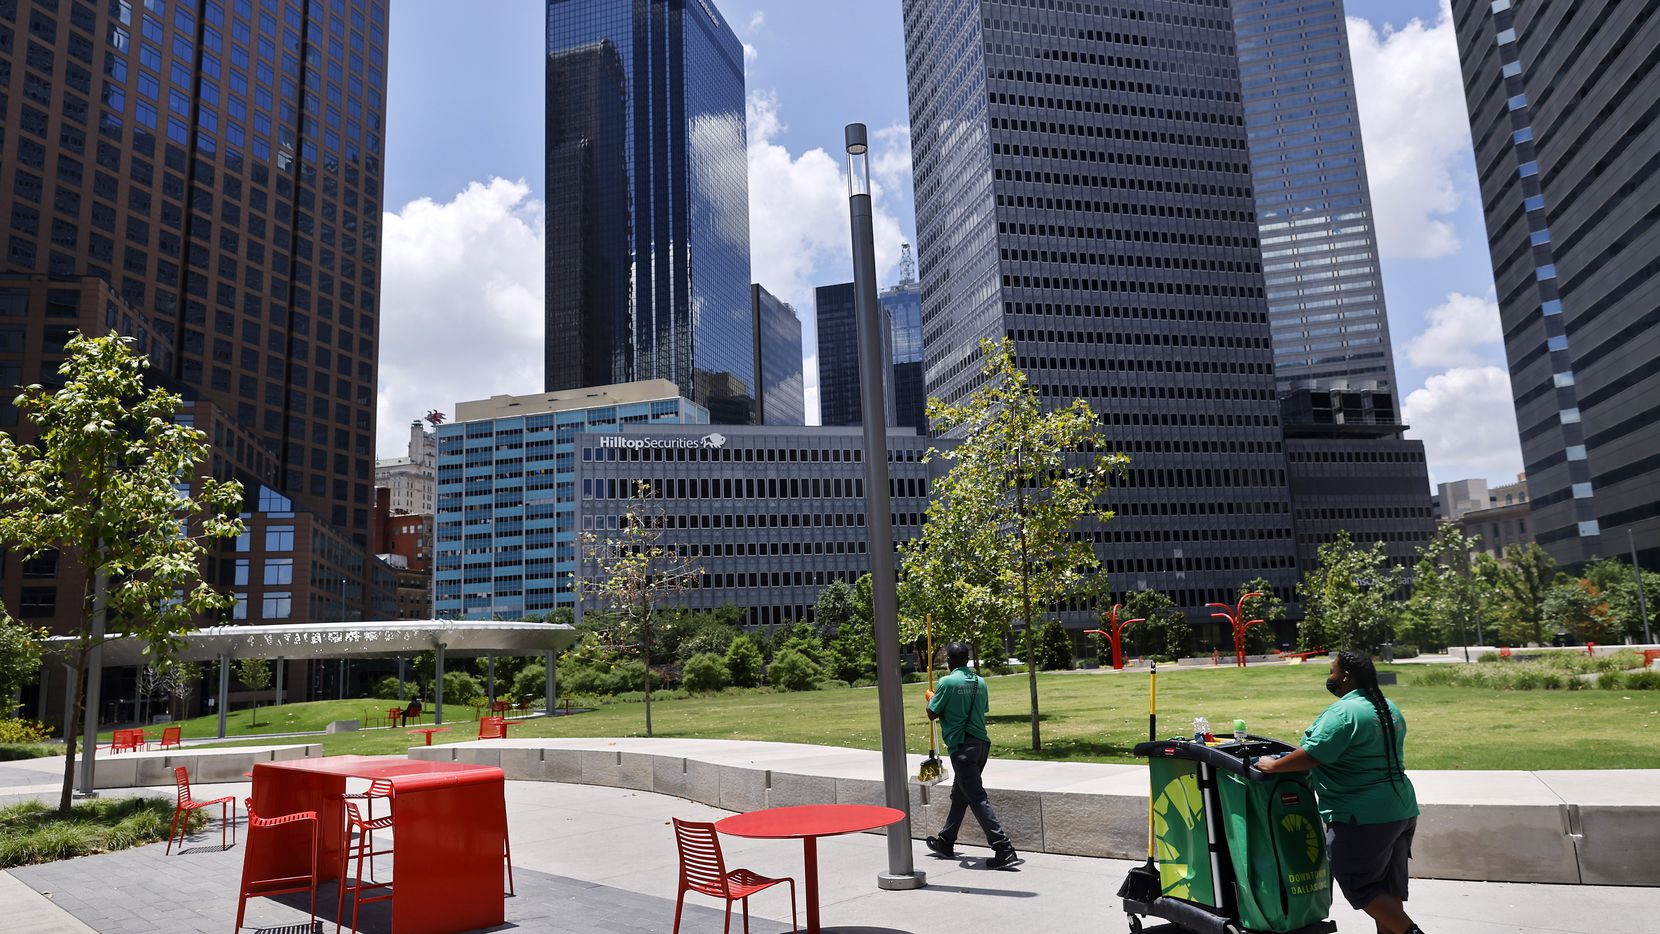 Downtown Dallas Inc. clean team members worked in Pacific Plaza on June 30, 2021.